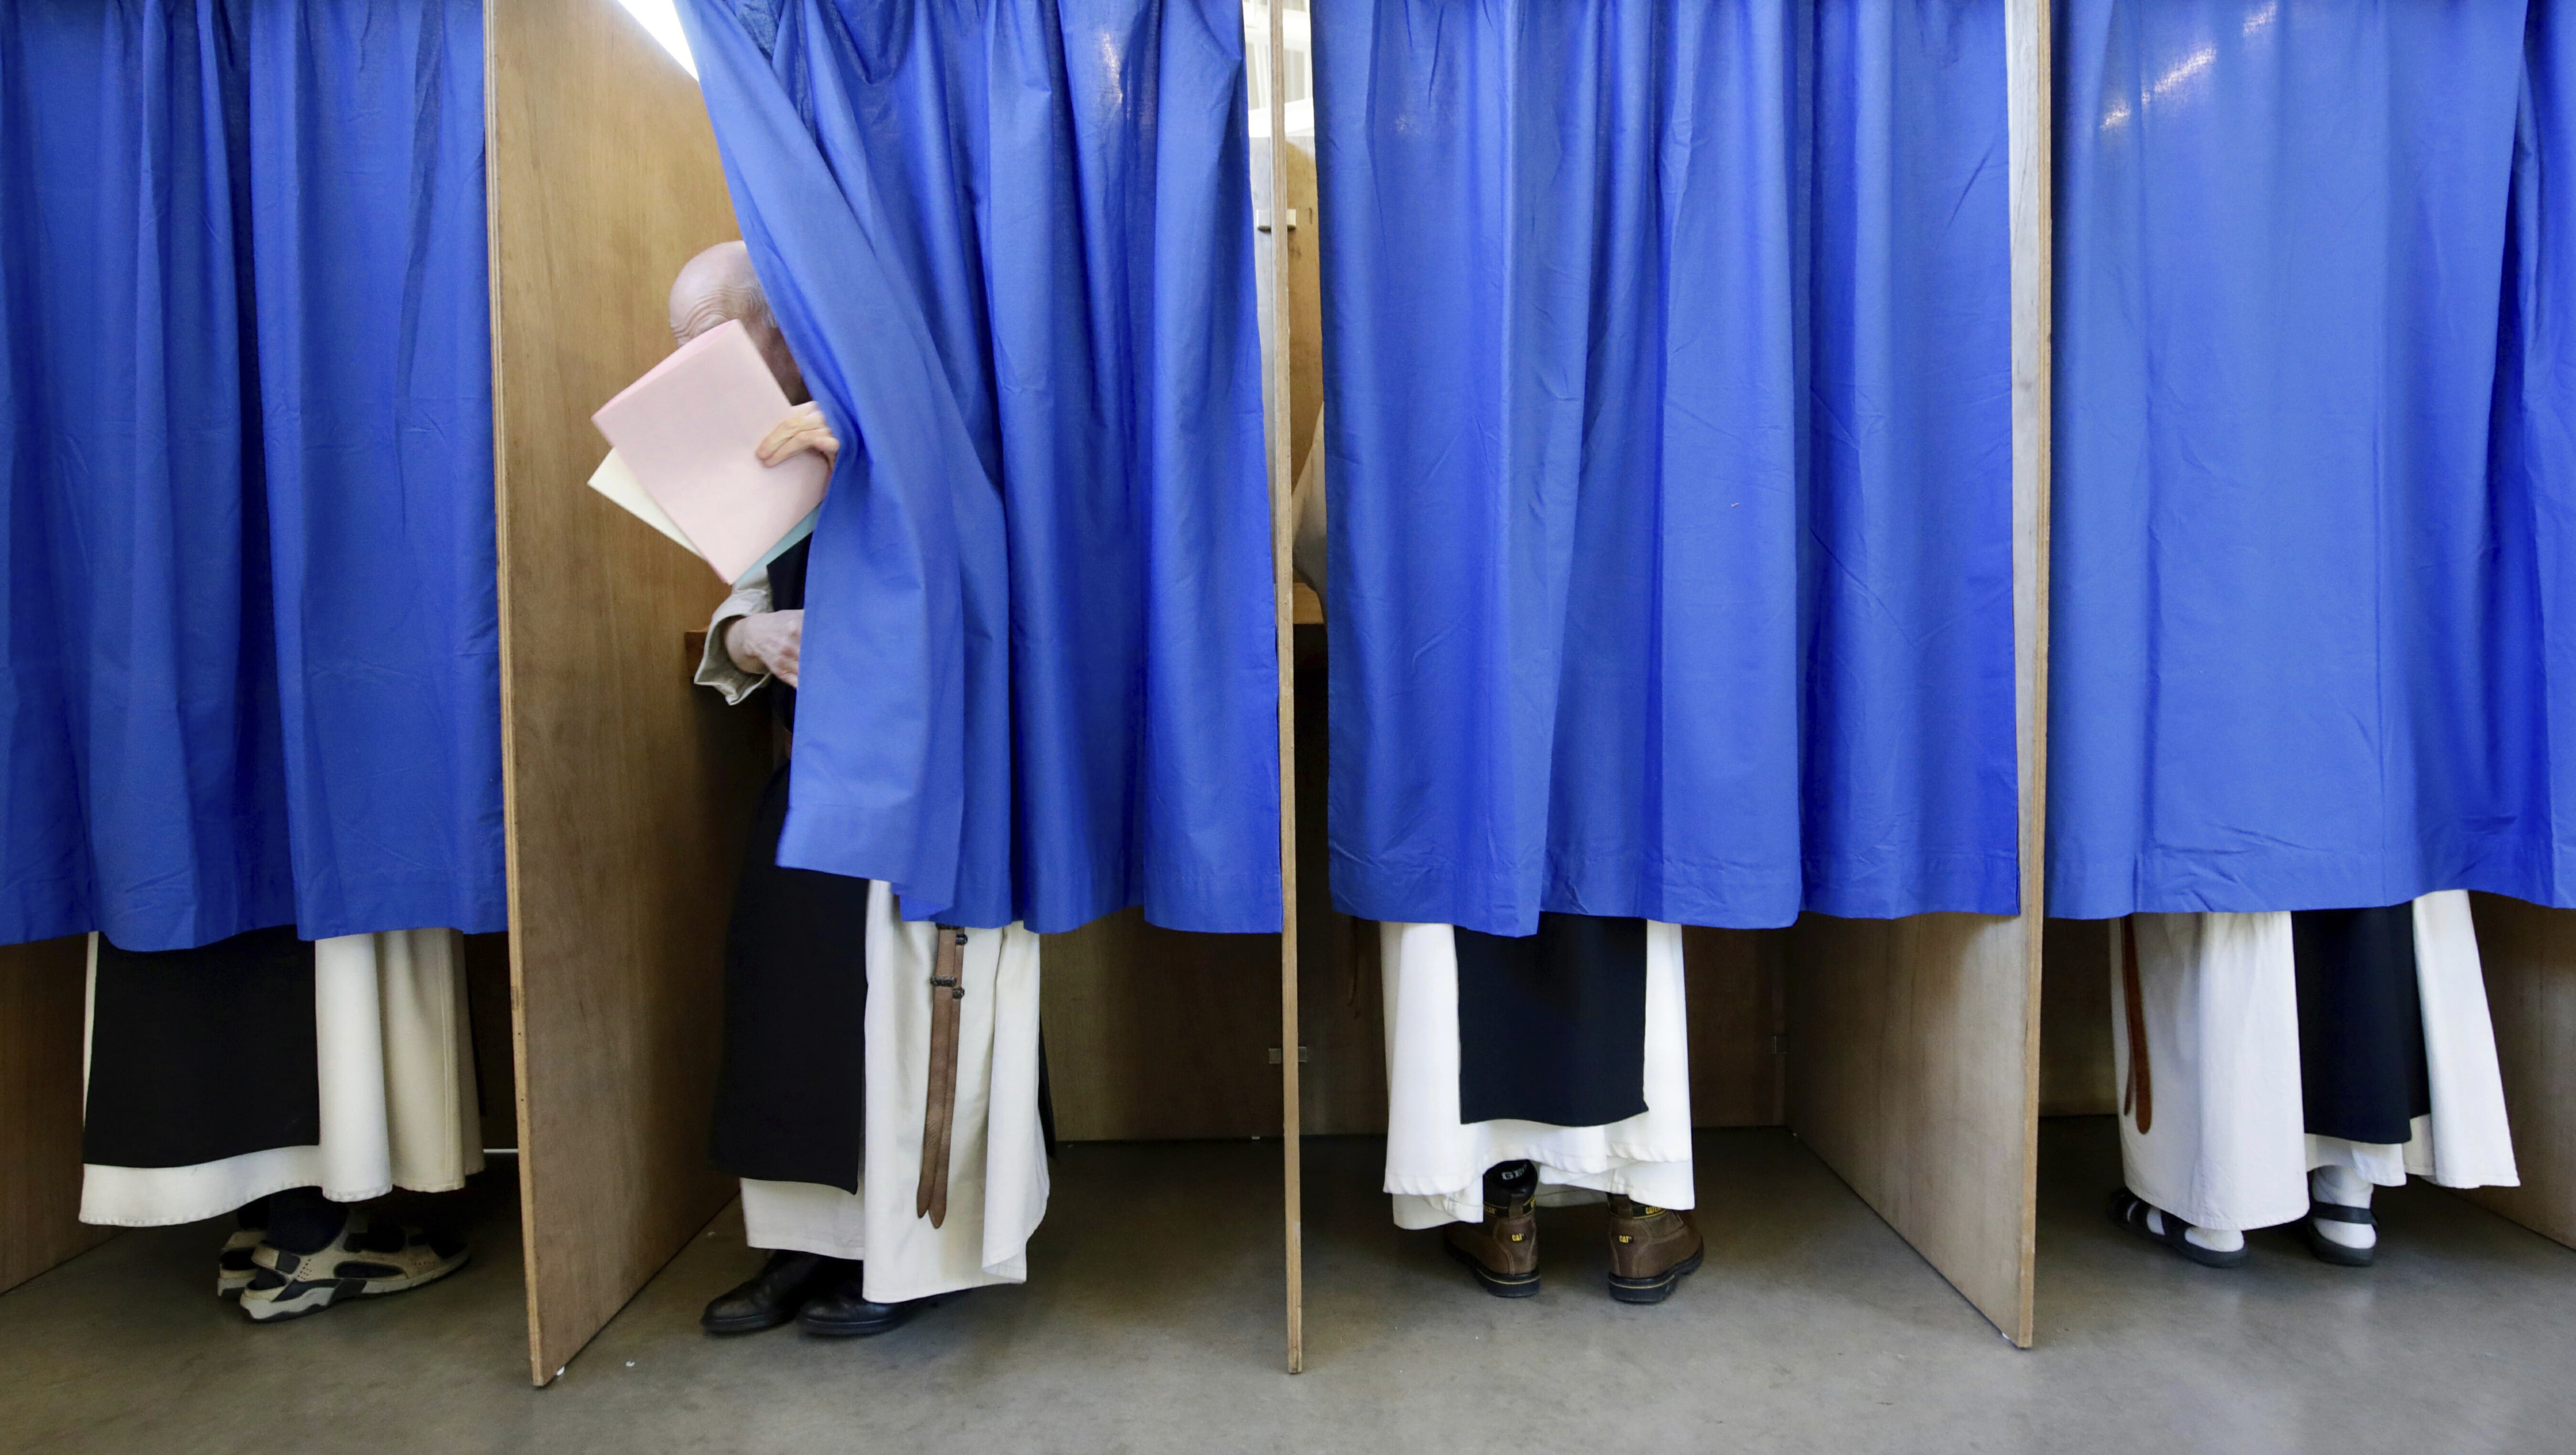 Curtained polling booths.